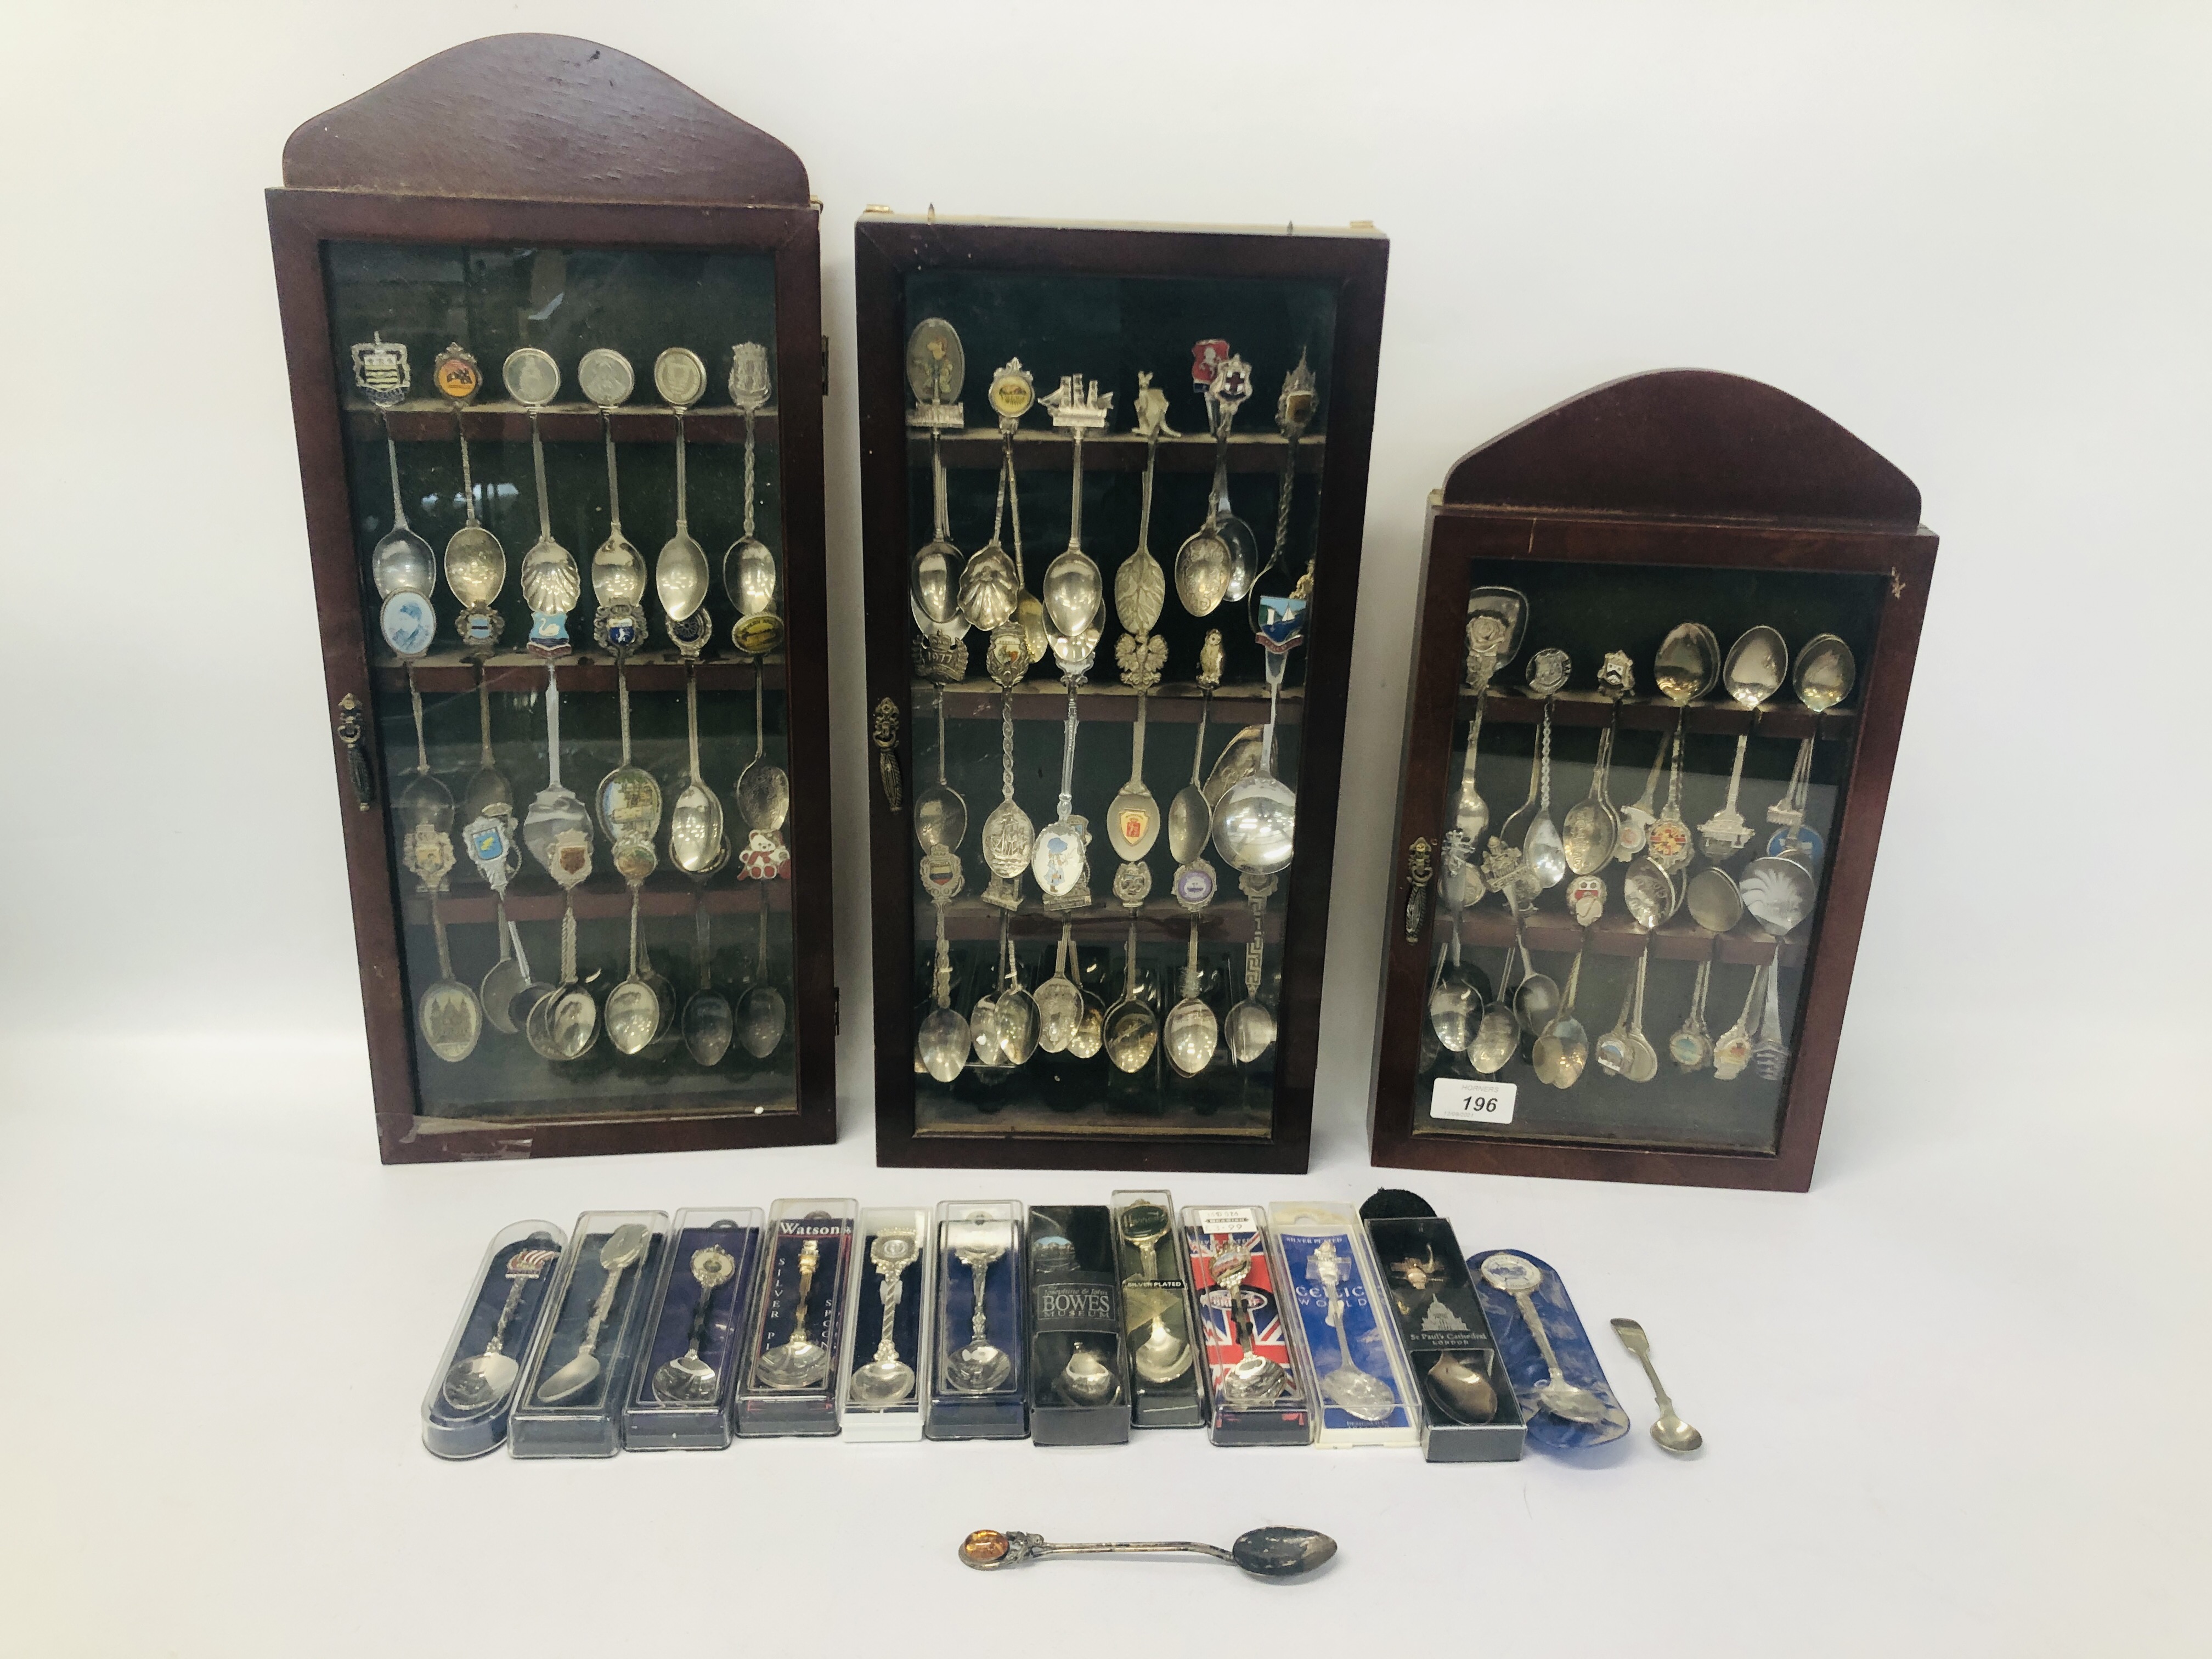 3 X COLLECTORS DISPLAY CASES CONTAINING A COLLECTION OF SOUVENIR SPOONS ALONG WITH A SILVER SPOON